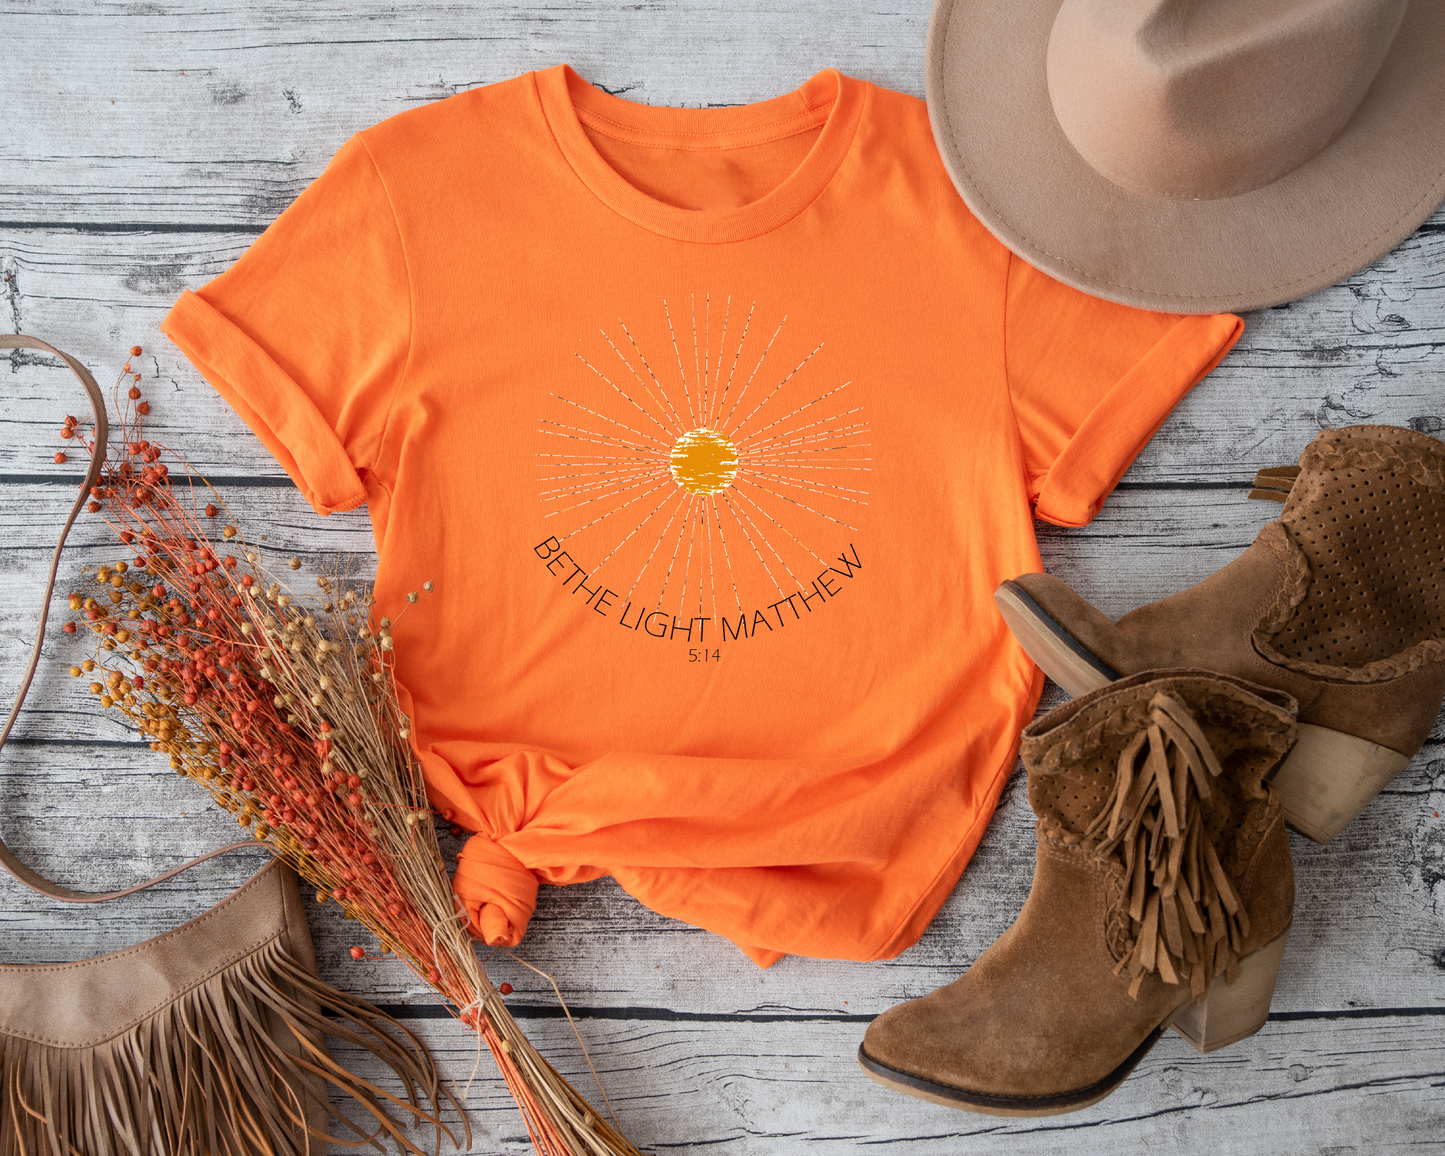 Spread positivity and hope with this unique and eye-catching "Be The Light" t-shirt.